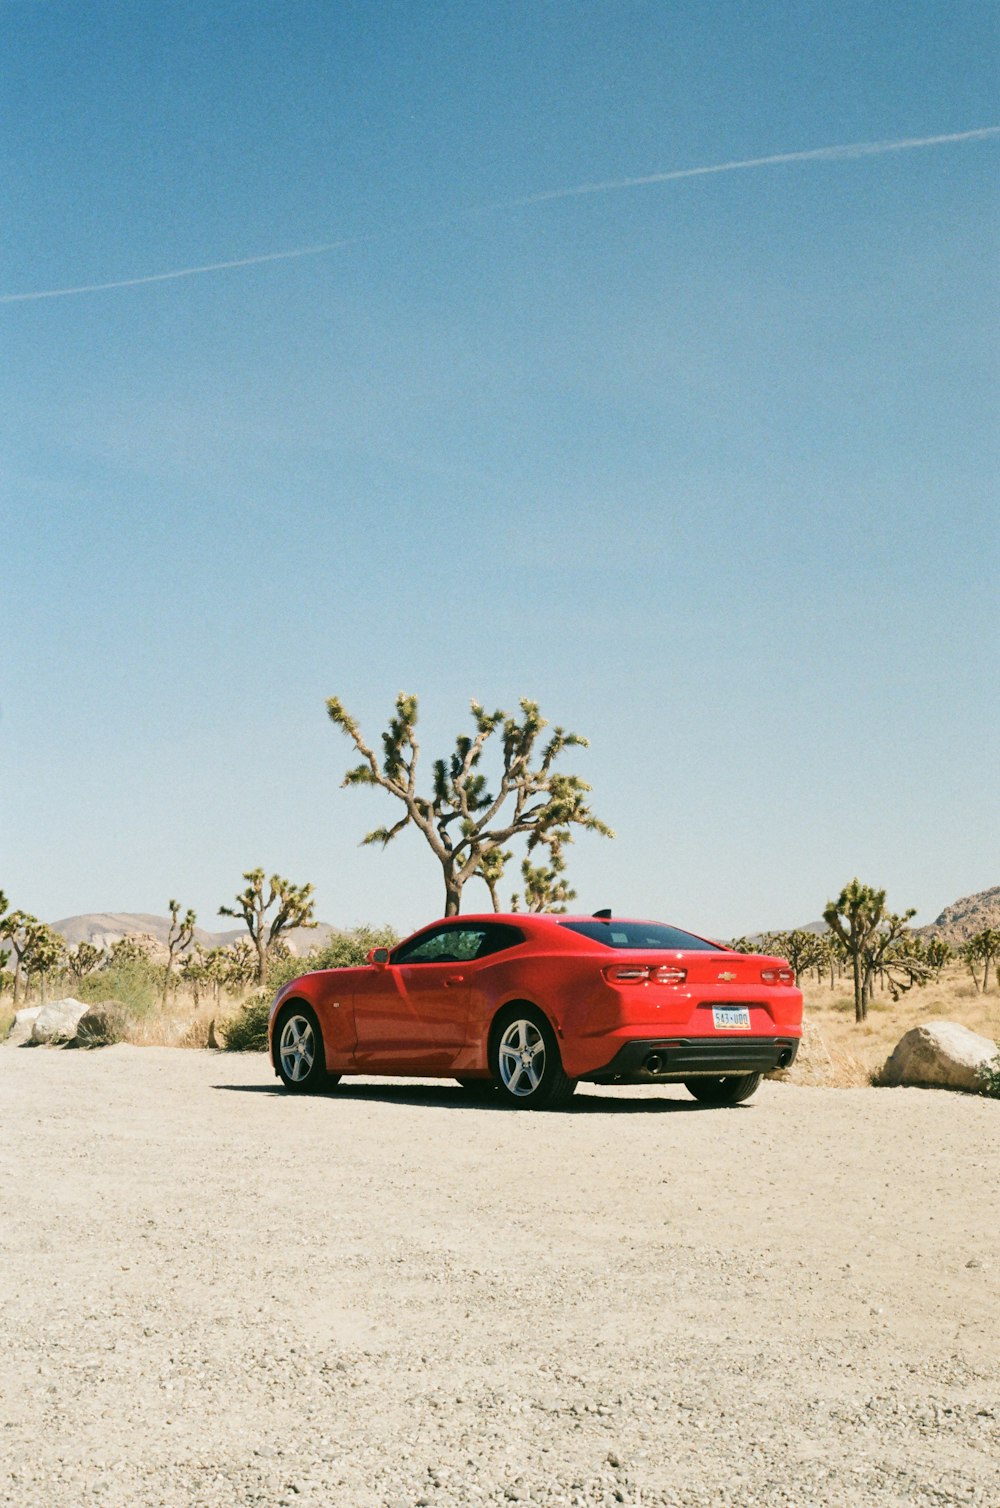 a red car parked on a dirt road with a tree and blue sky